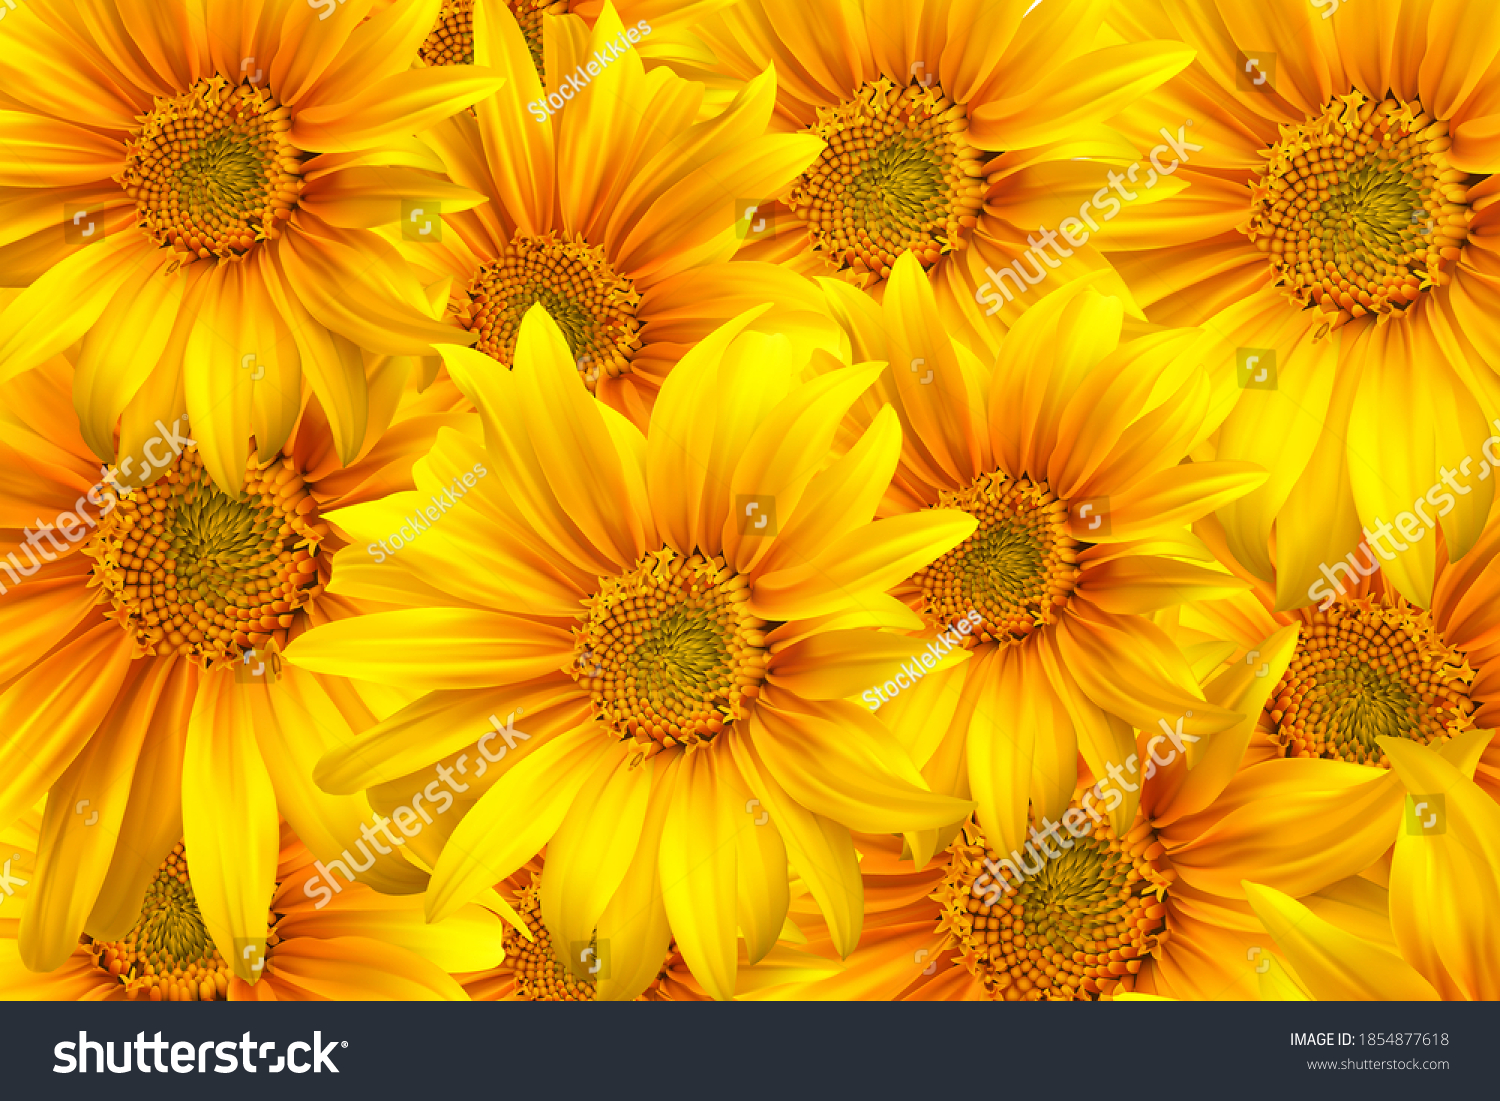 SVG of 3D realistic sunflower flower background. Yellow sunflower in motion. Beautiful sunflower background. Sunflower flower seamless background. High quality vector illustration. EPS 10 svg